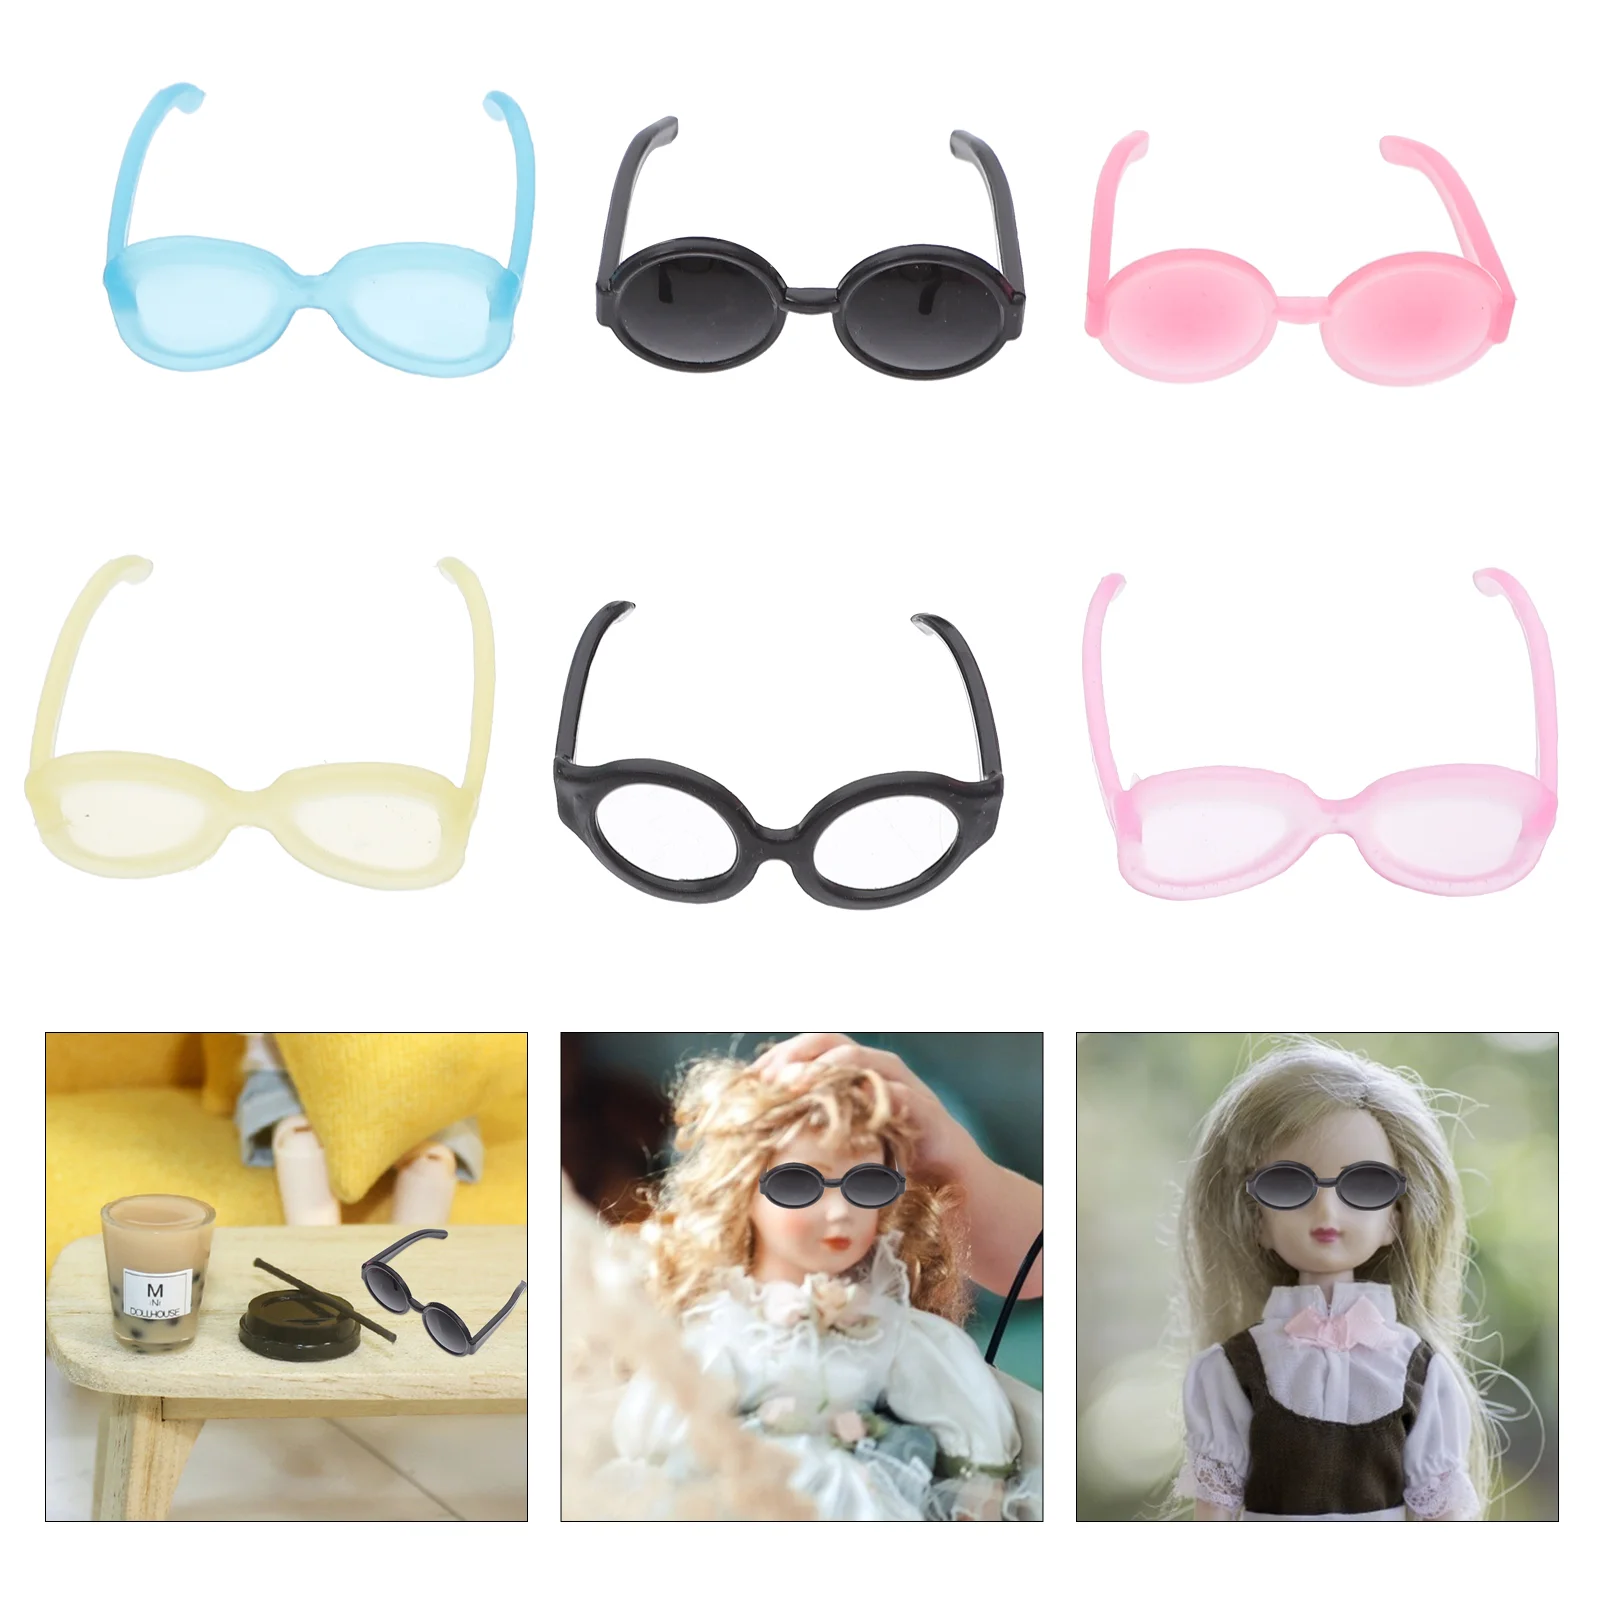 

Glasses Sunglasses Mini Eyeglasses Accessories Inch Dressing Crafts Miniature Plastic Baby Toy Play Tiny Costume Dog Dress Up